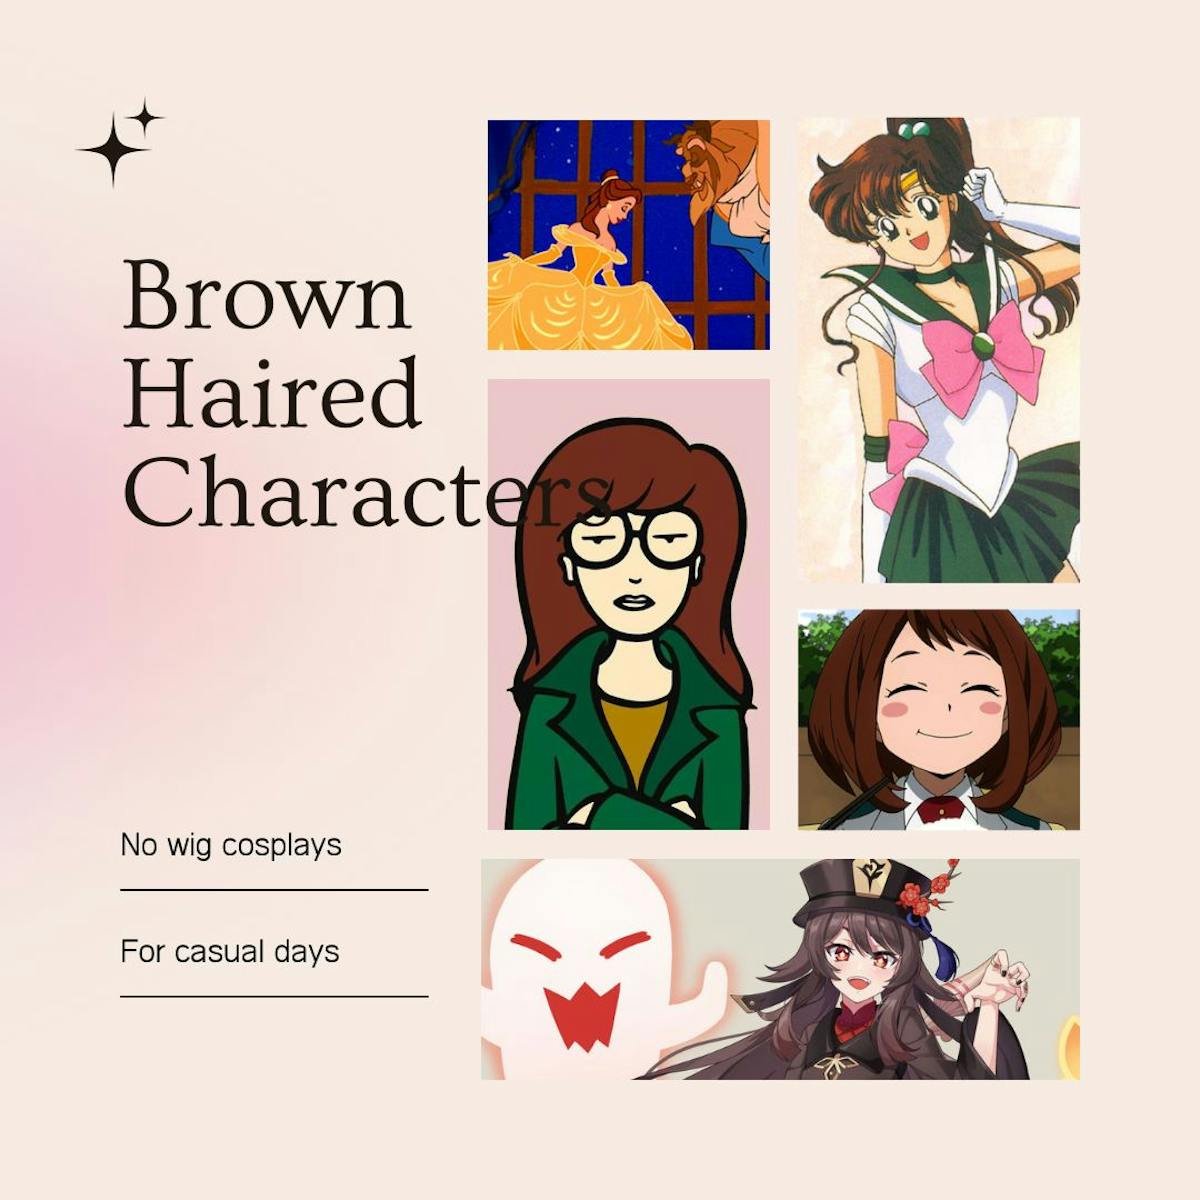 Brown haired characters for easy cosplays